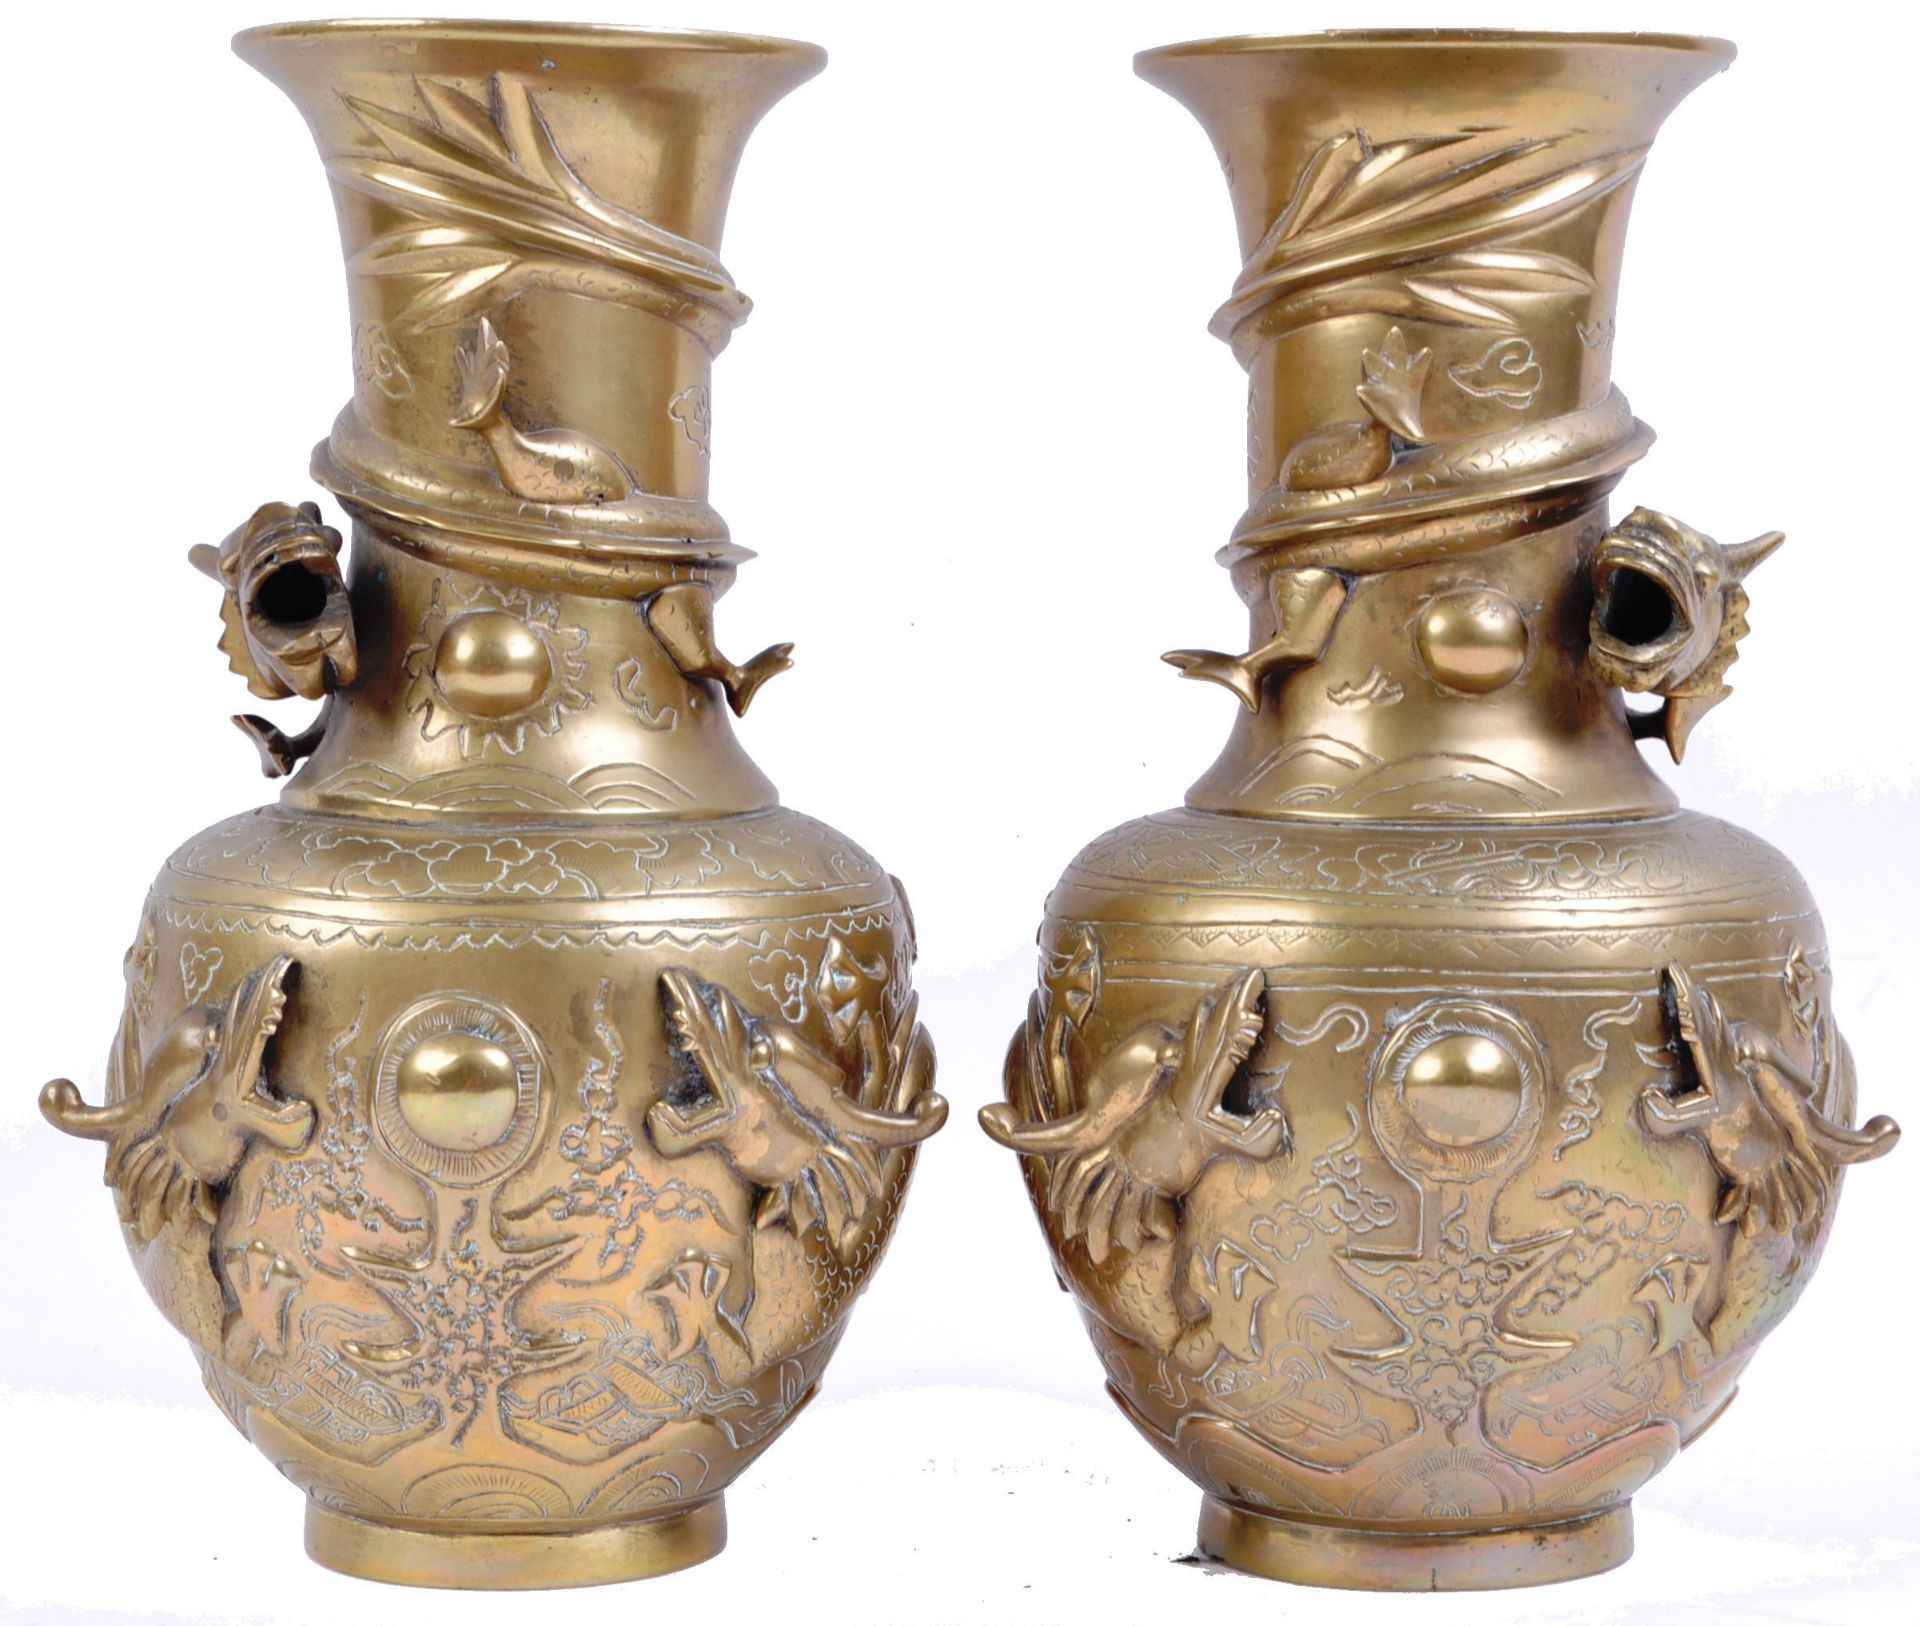 PAIR OF ANTIQUE CHINESE BRASS DRAGON VASES